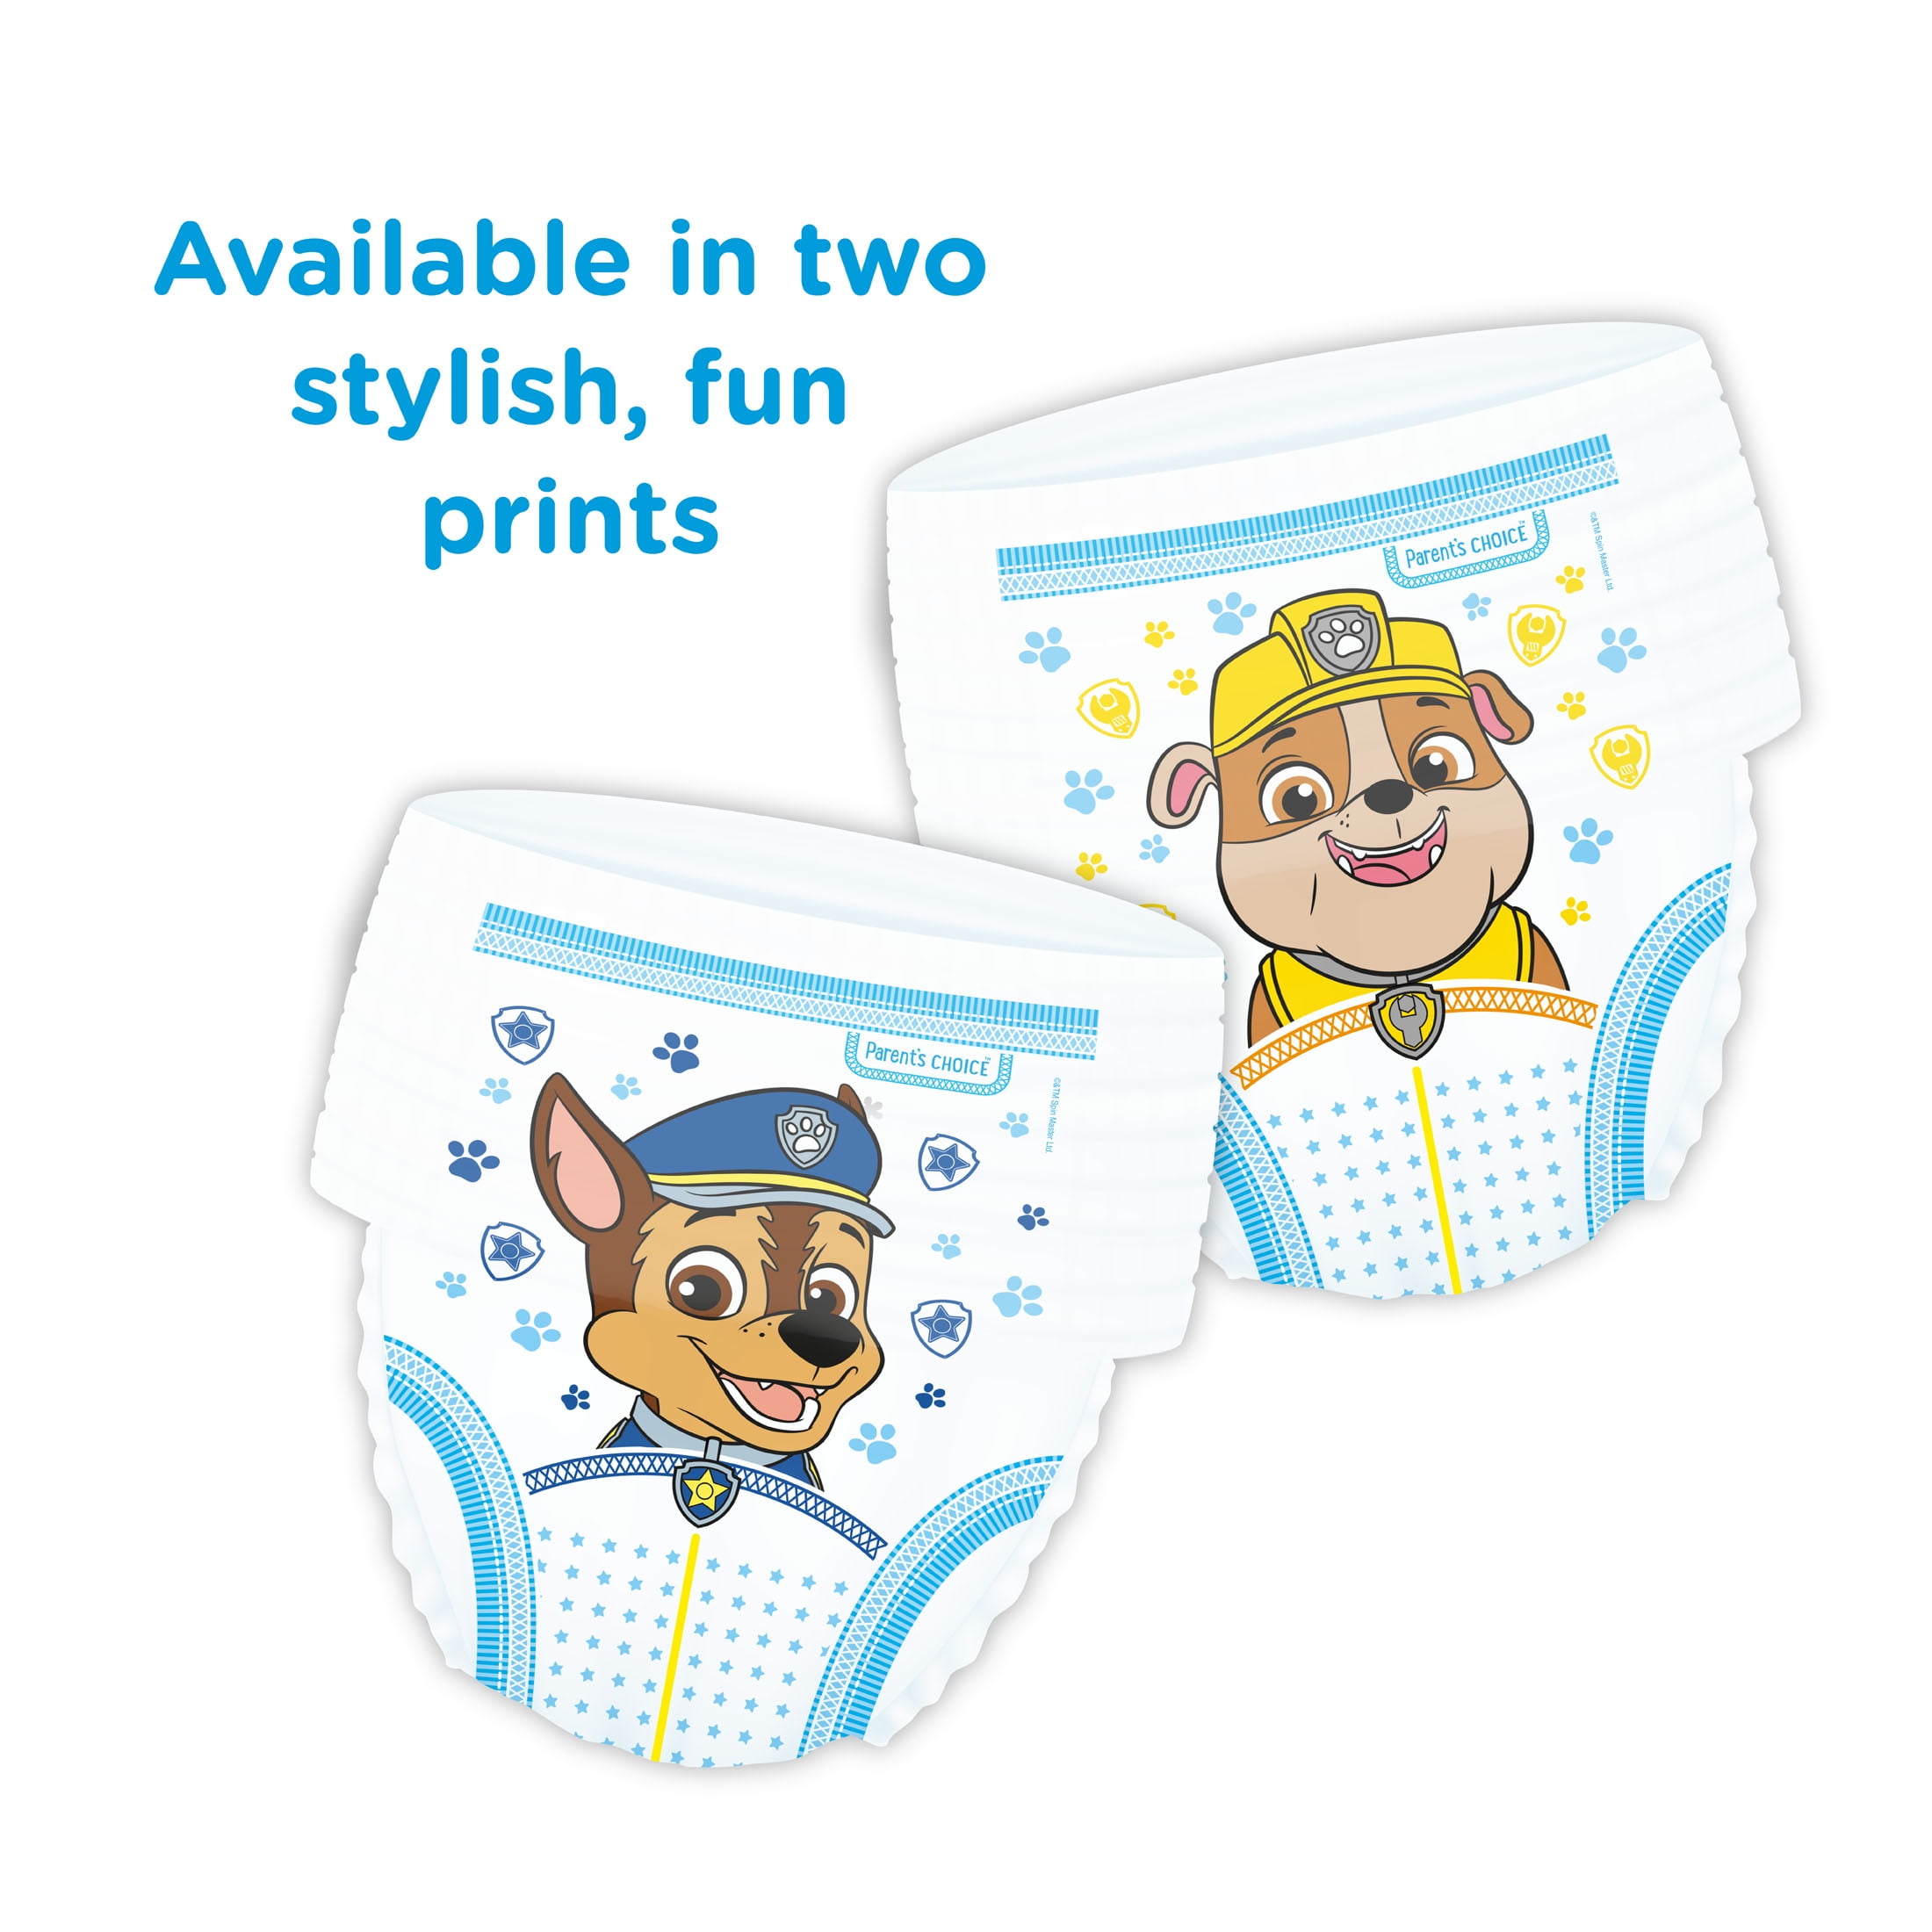 Parent's Choice Paw Patrol Training Pants for Girls, 4T/5T, 70